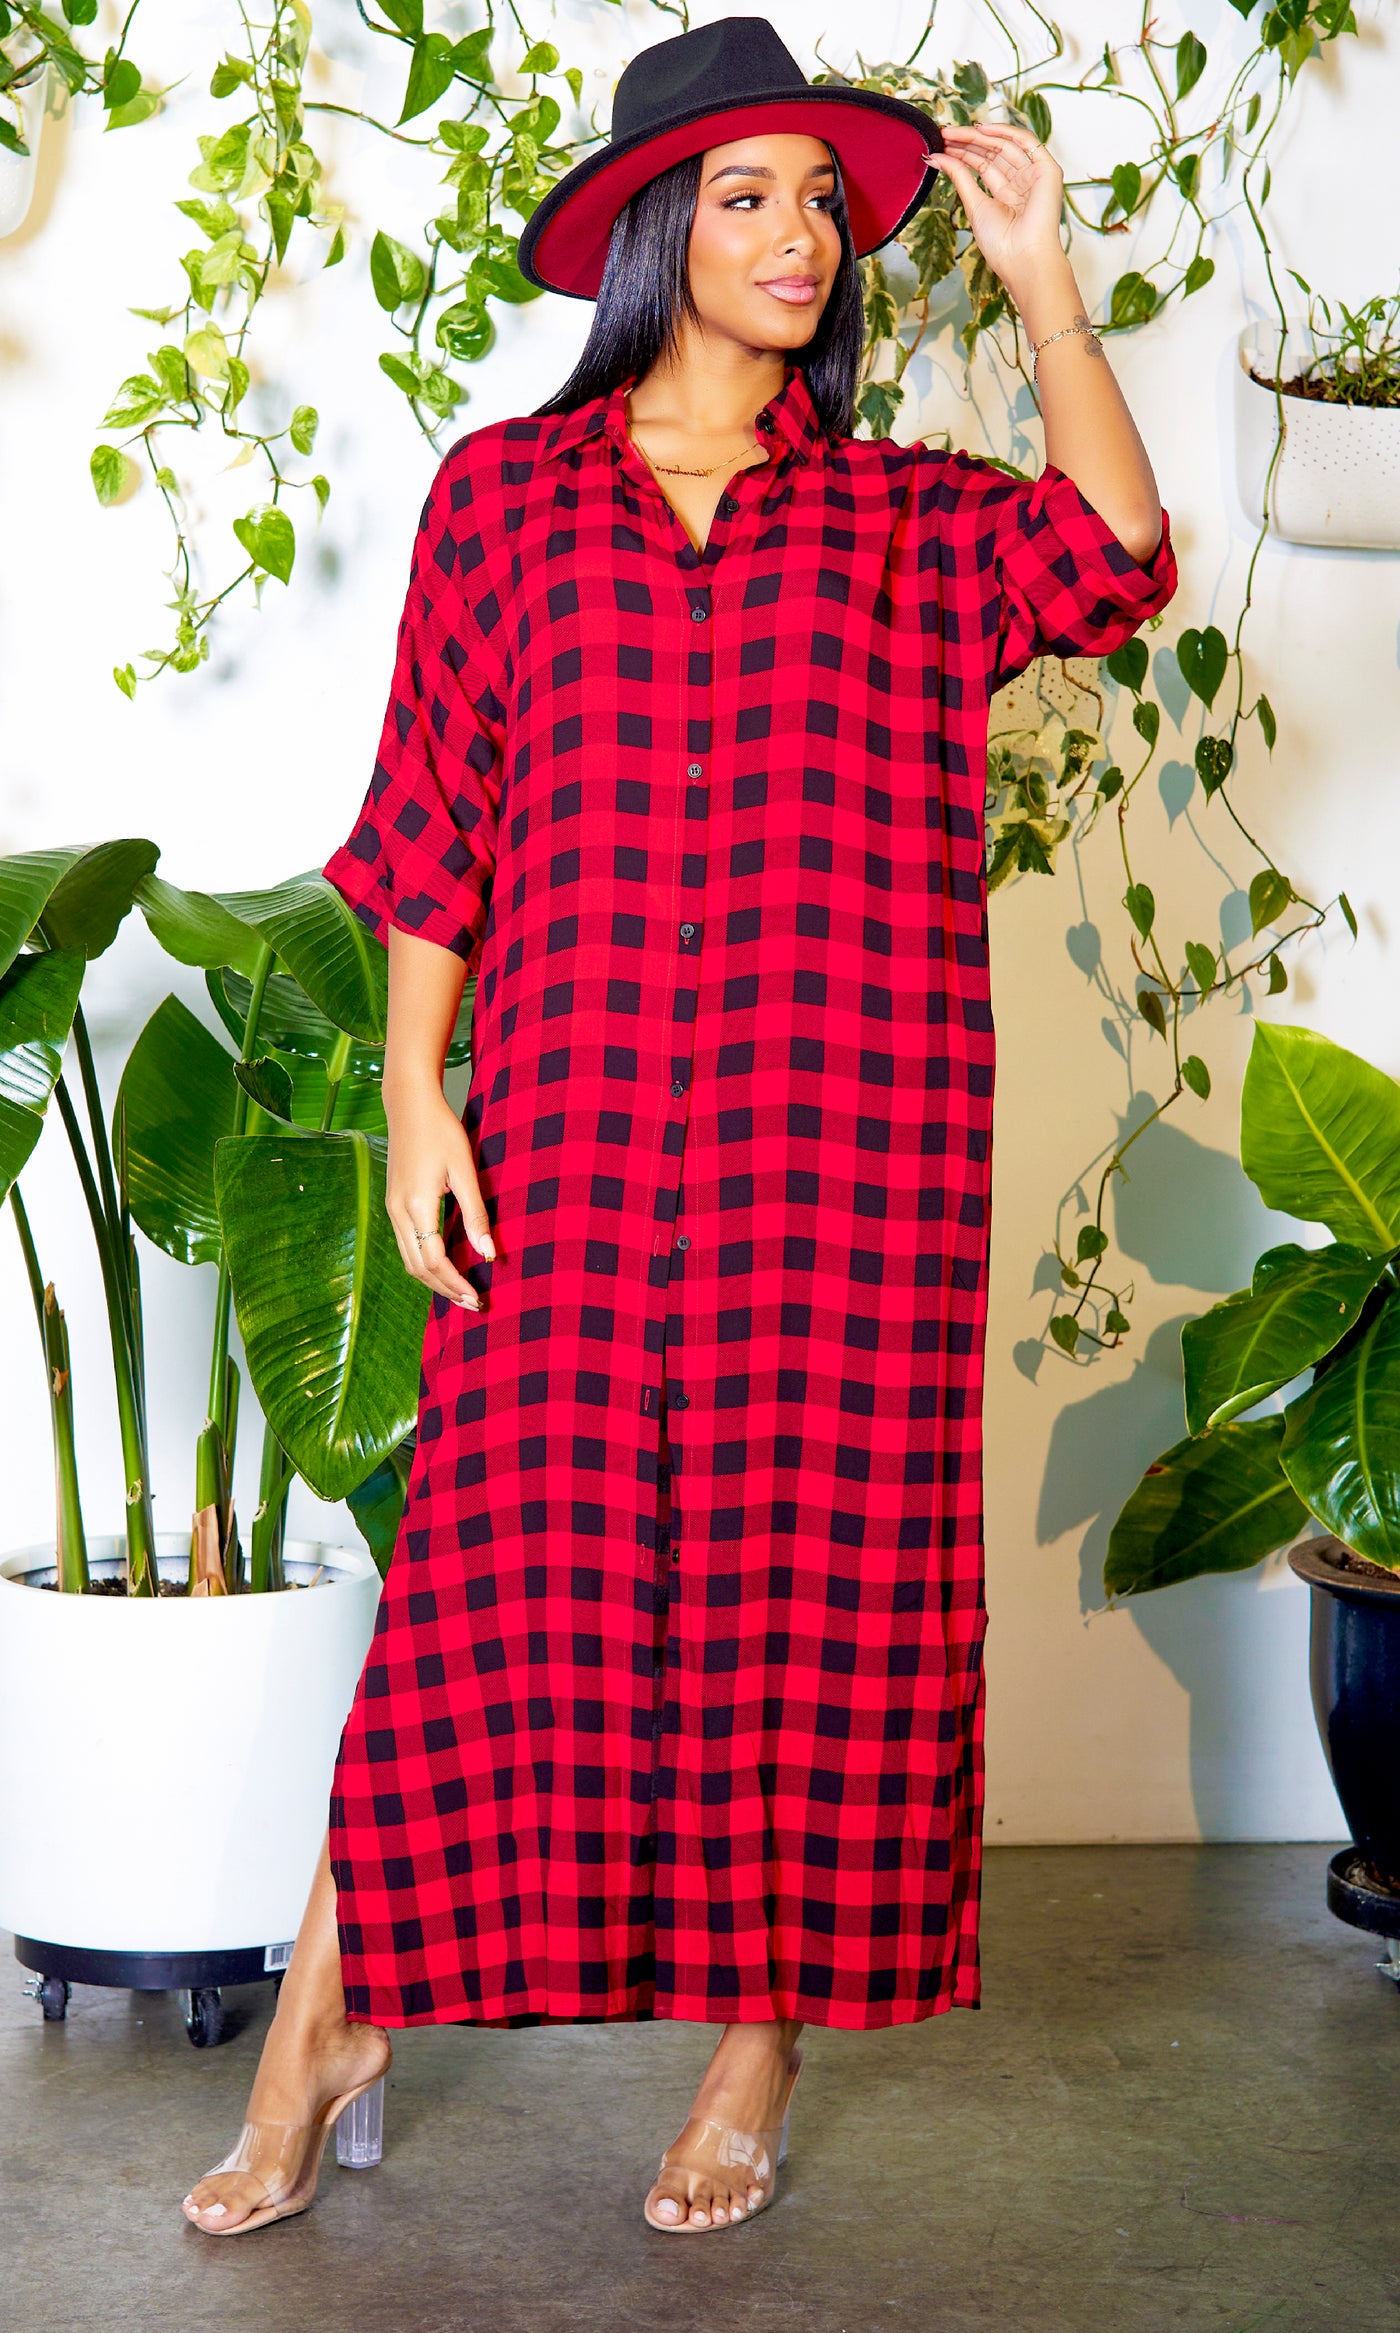 Red Plaid Dress/ Cardigan - Cutely Covered